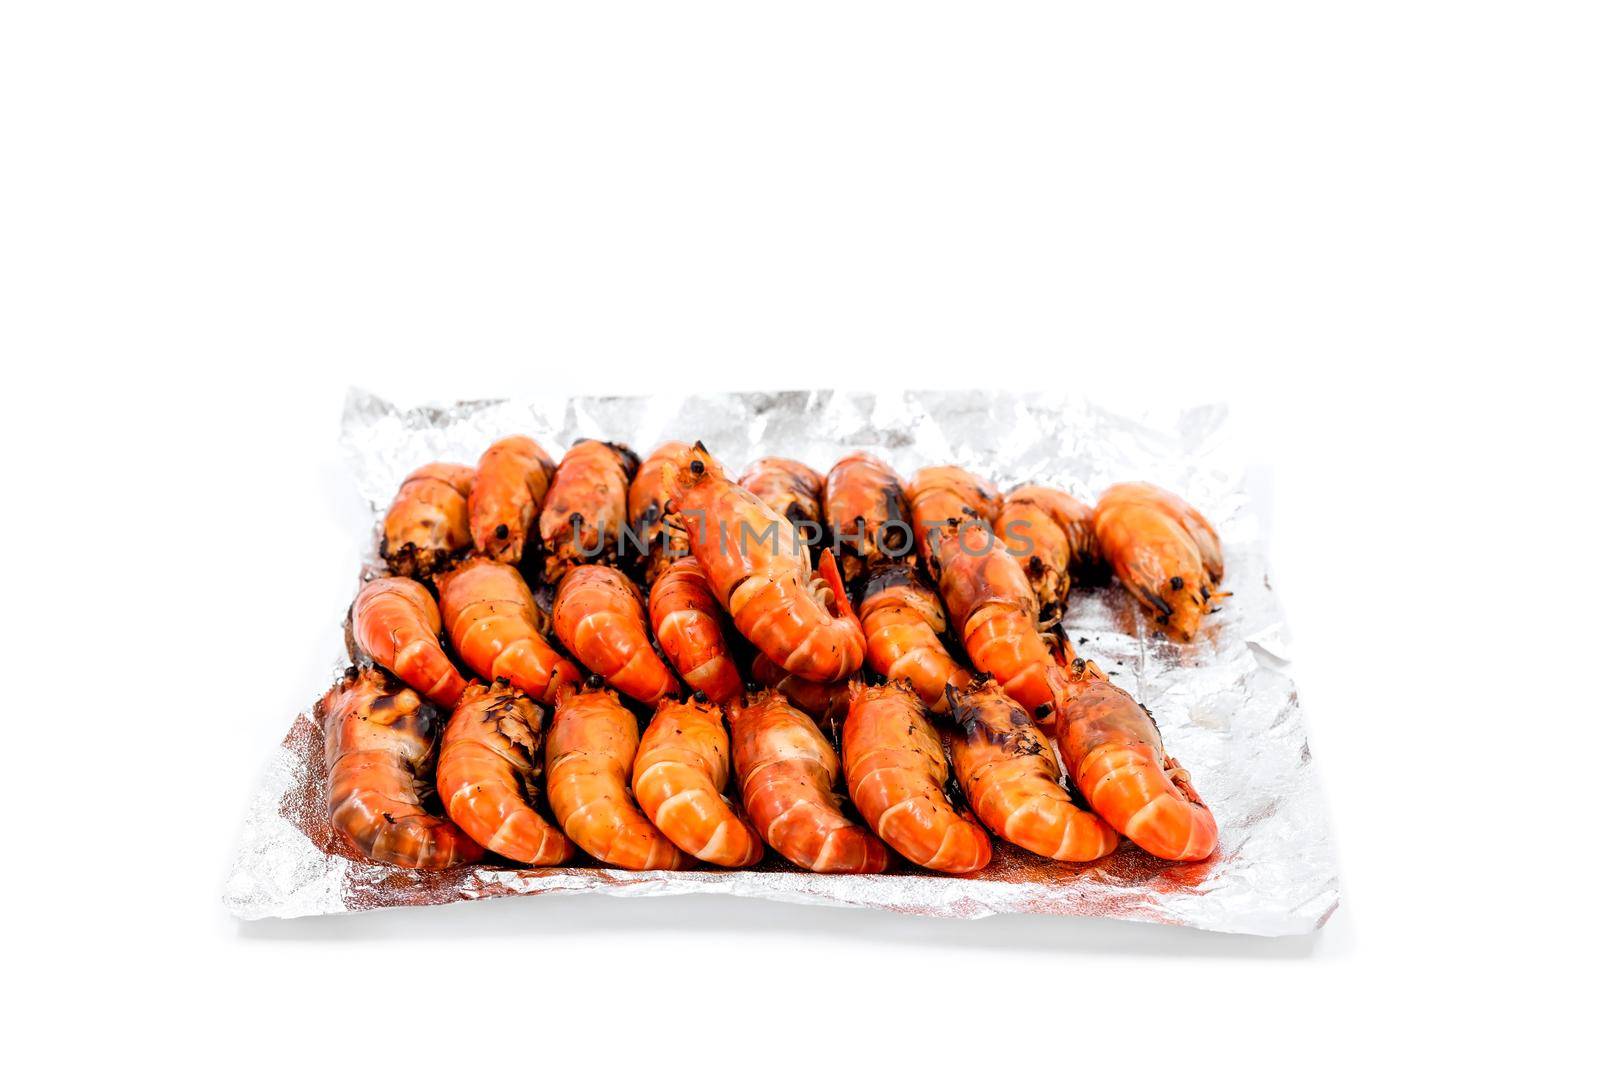 Arrange grilled river prawns on foil to deliver to customers ordering food online. by wattanaphob